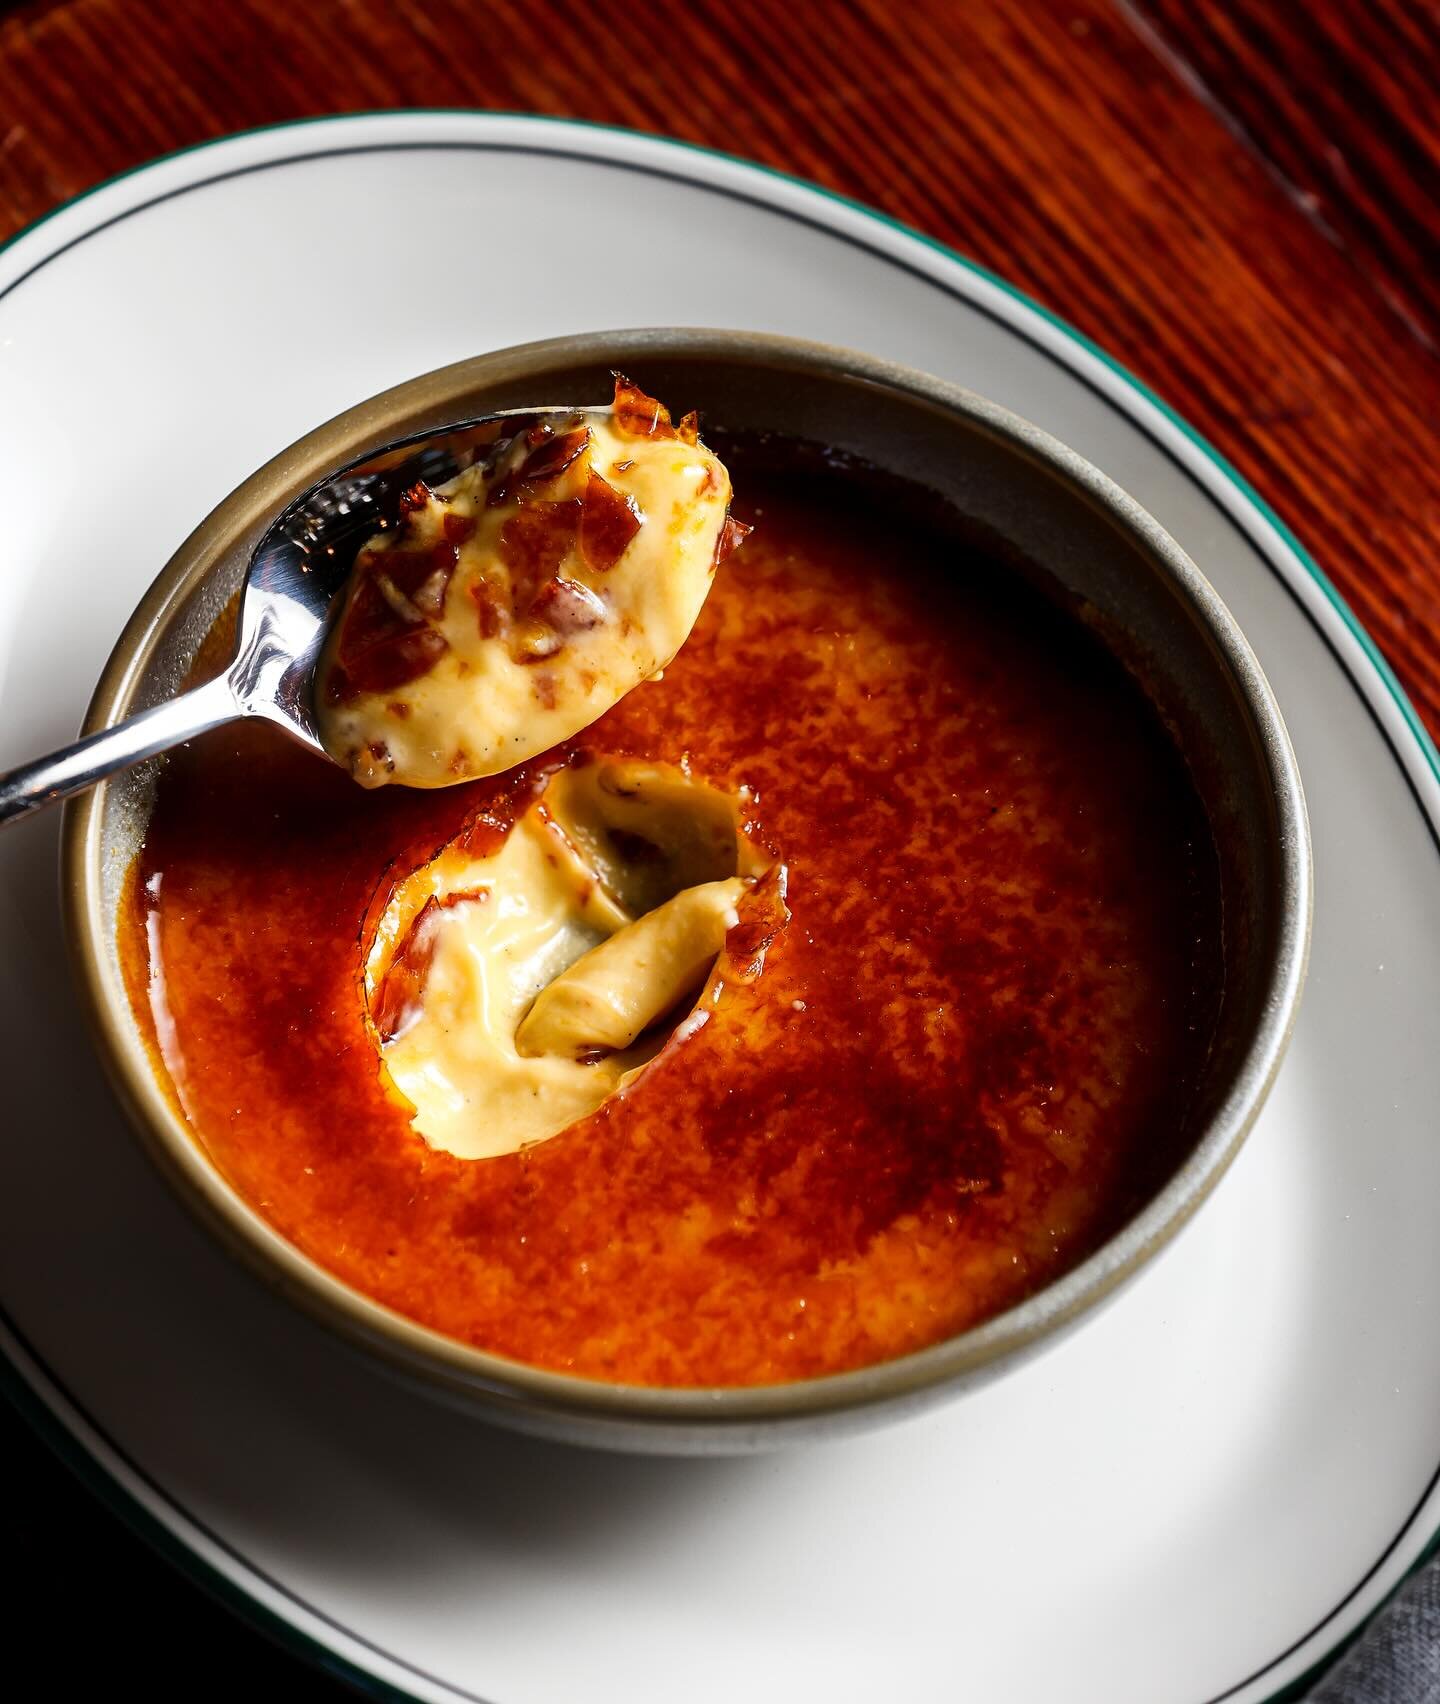 Guess who&rsquo;s back!! Tomorrow night our Cr&egrave;me Br&ucirc;l&eacute;e makes its much awaited return!! ❤️

📸 @theedibleimage 
#ruckershill #melbournerestaurant #melbournewine #desserts #cremebrulee #frenchfood #frenchfilmfestival